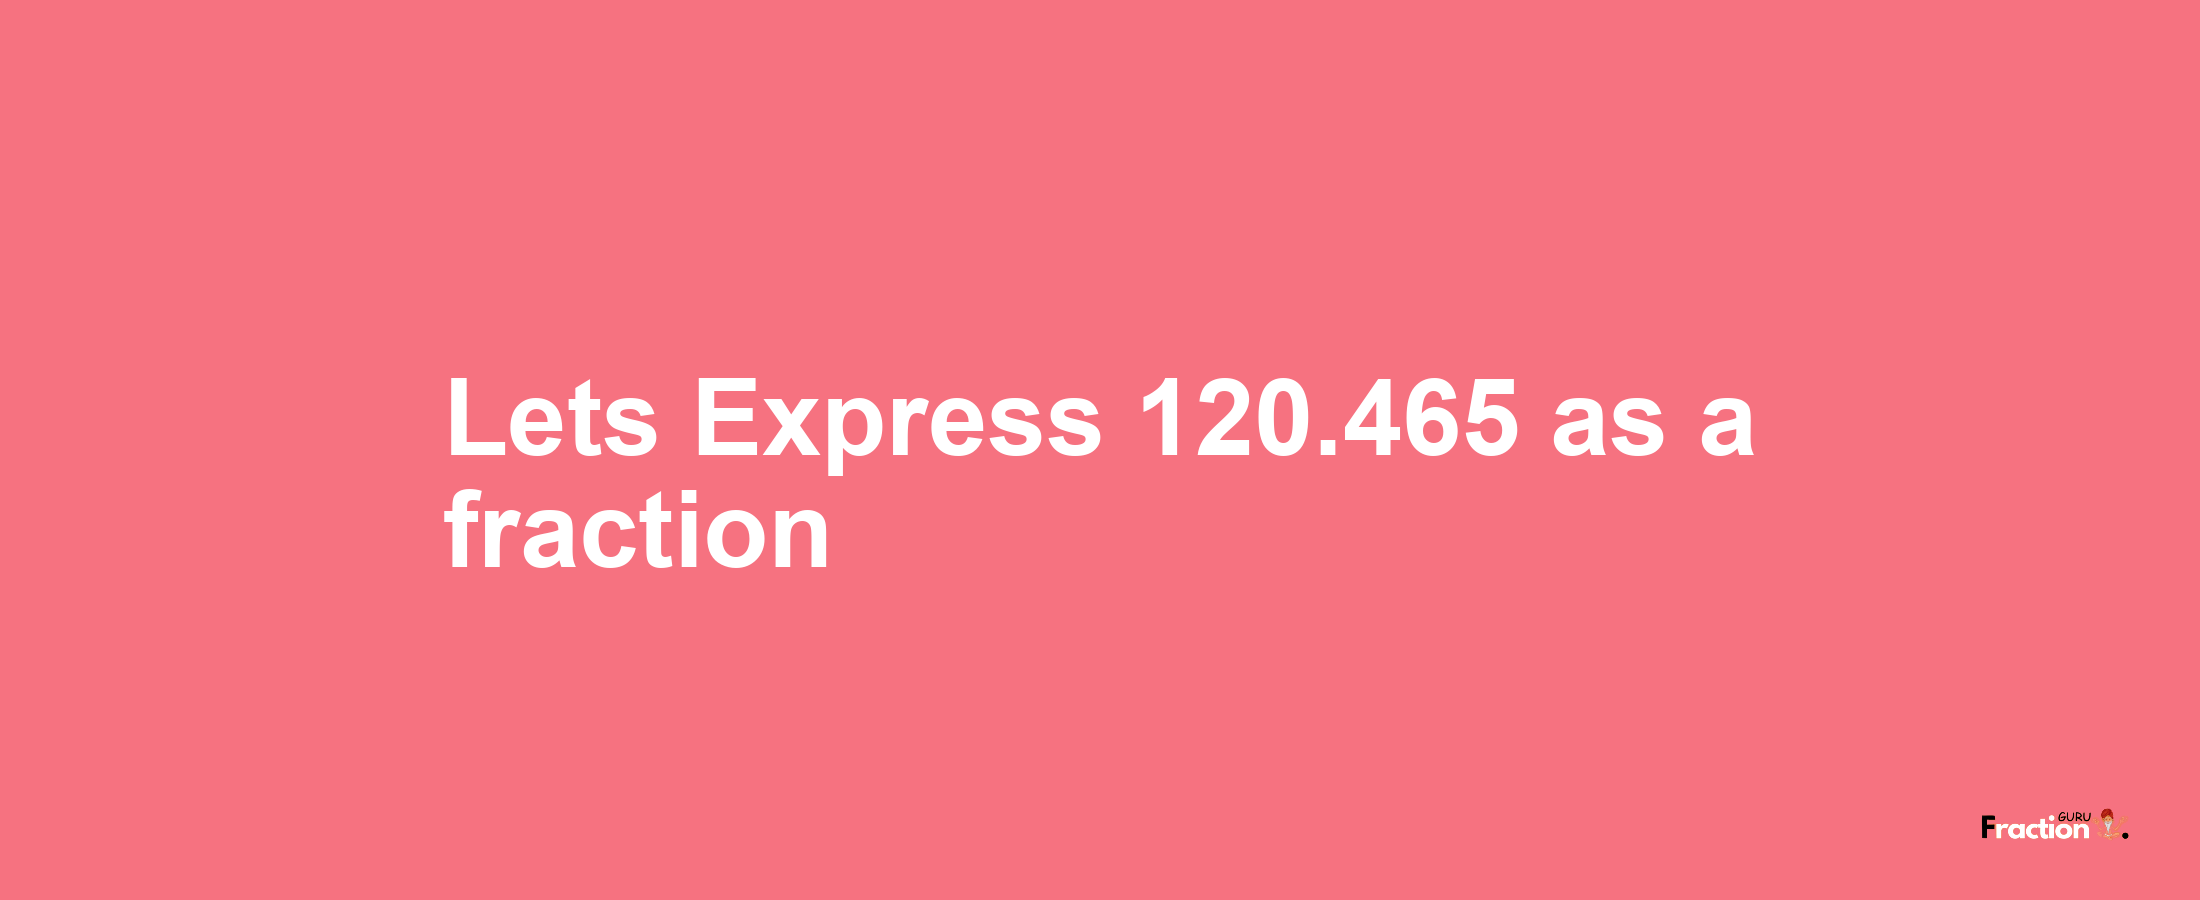 Lets Express 120.465 as afraction